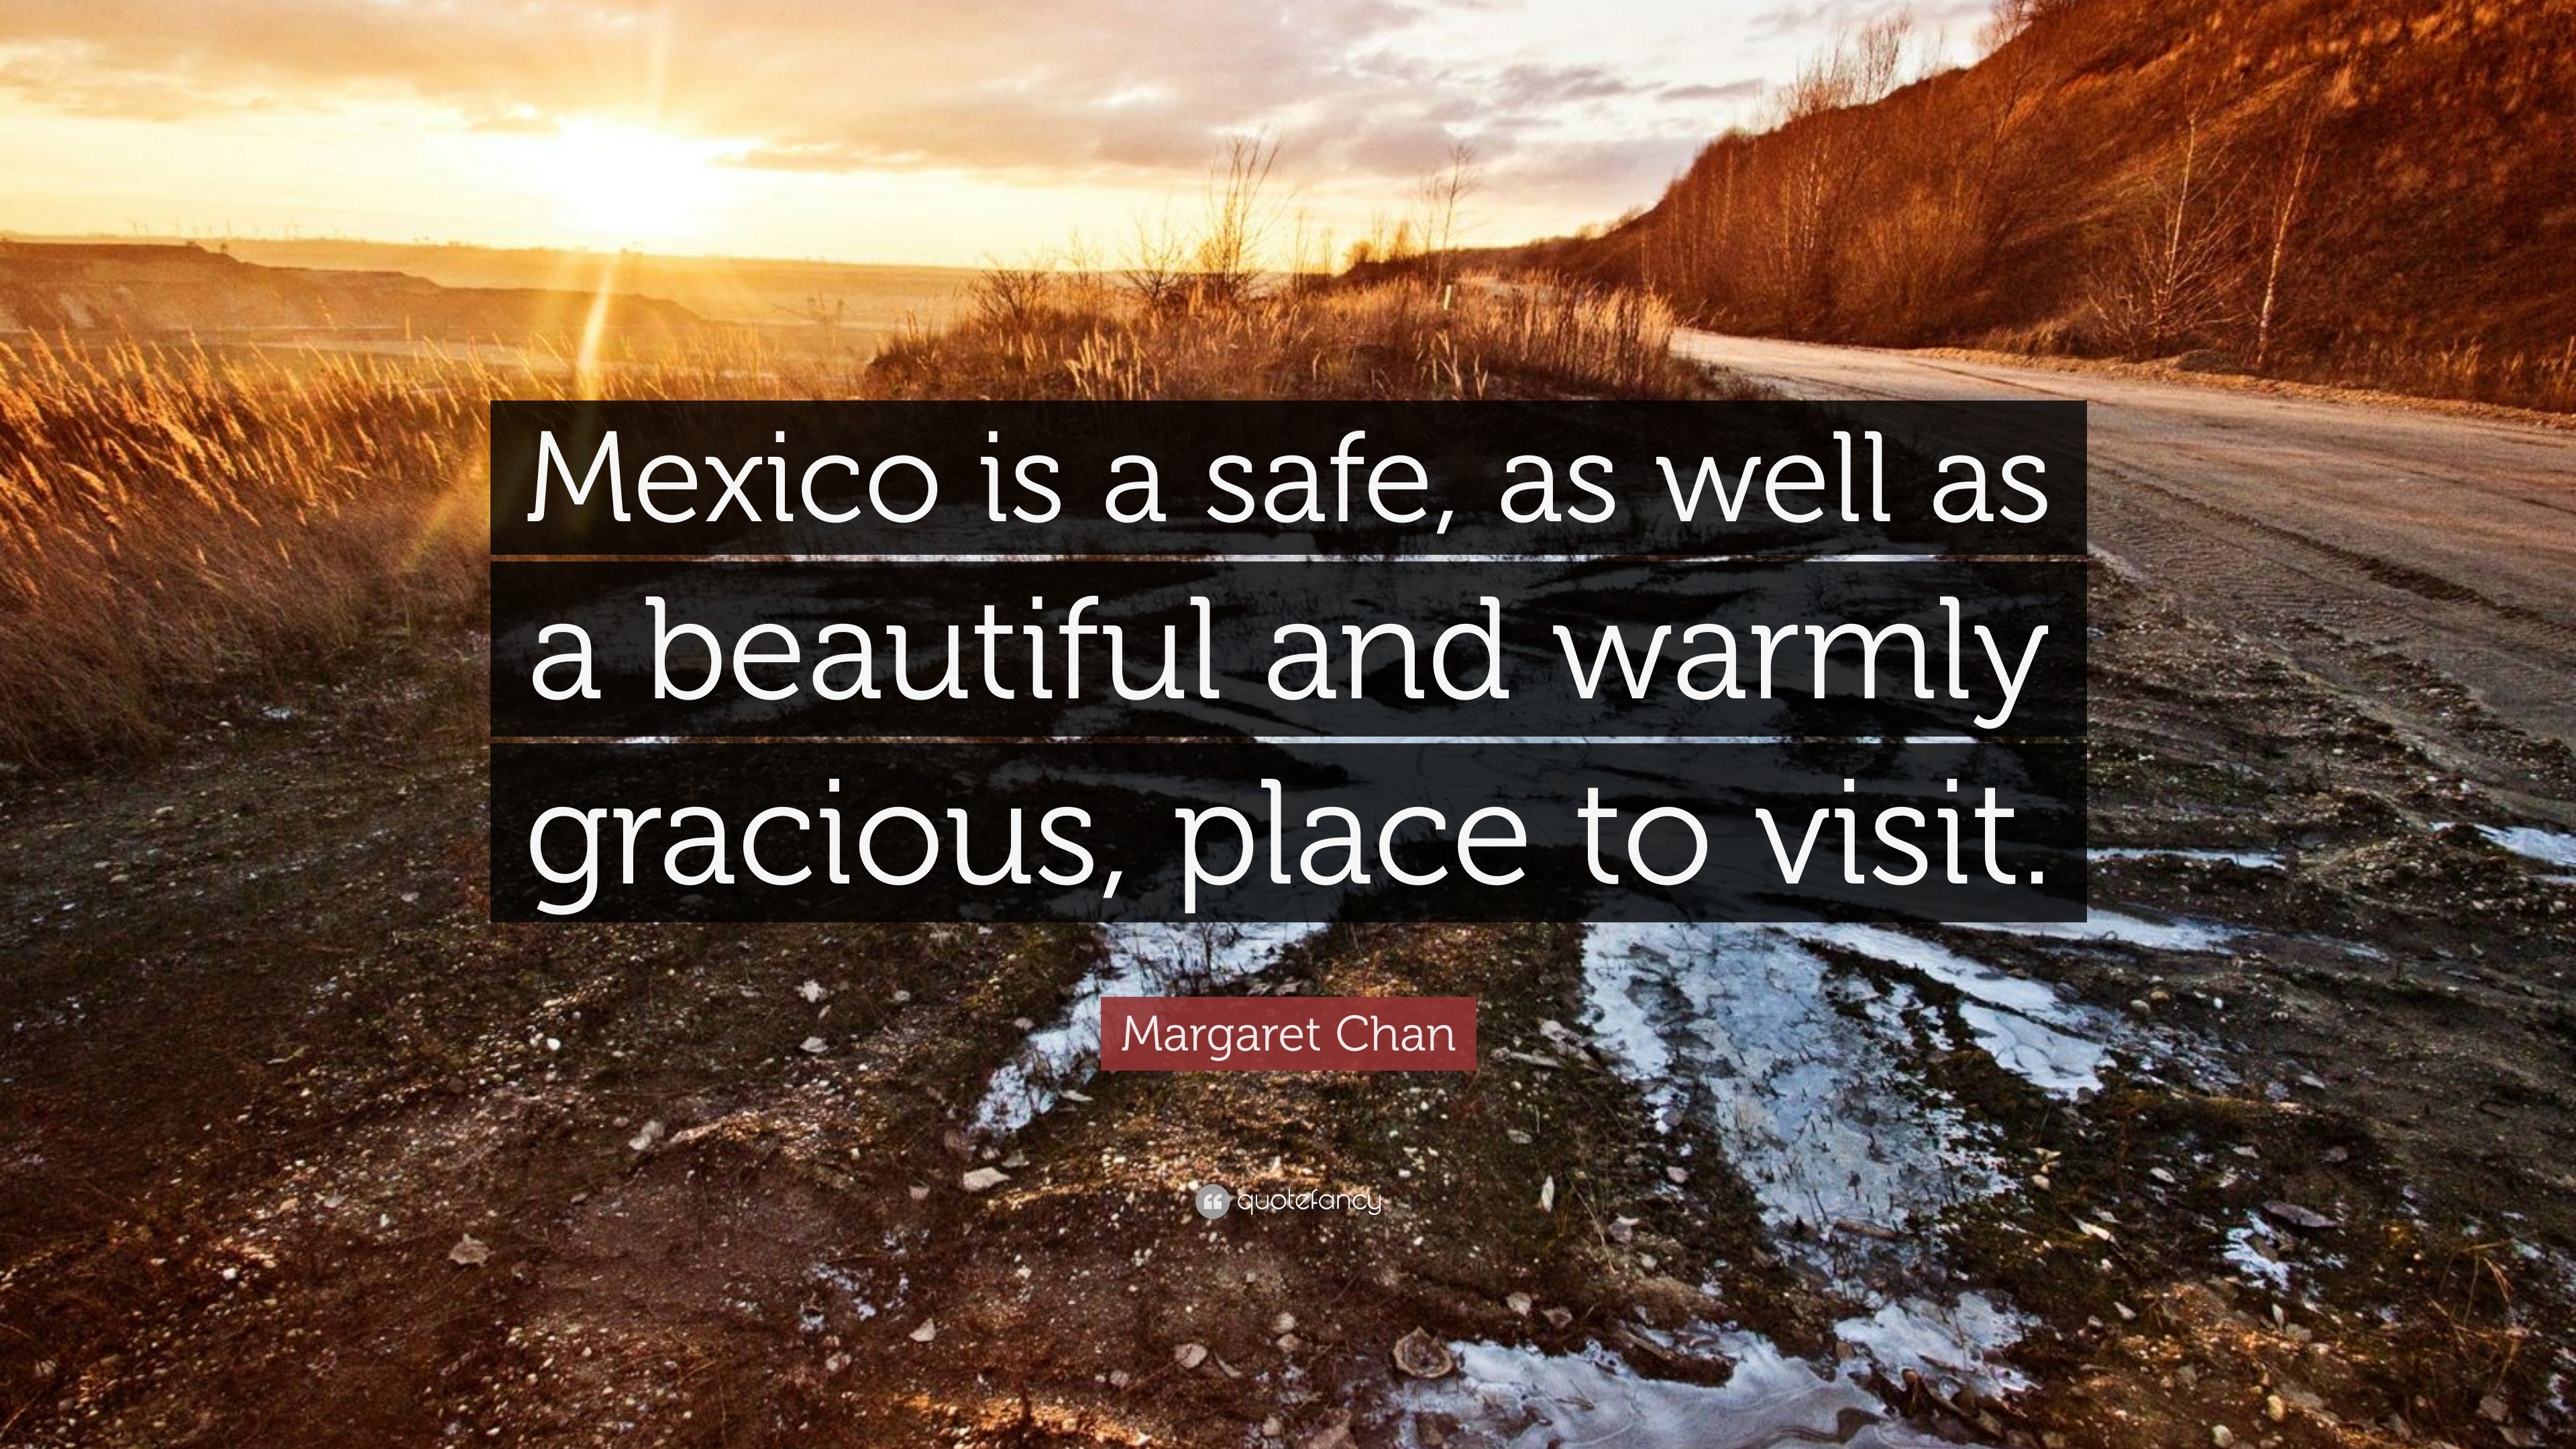 Margaret Chan Quote: “Mexico is a safe, as well as a beautiful and